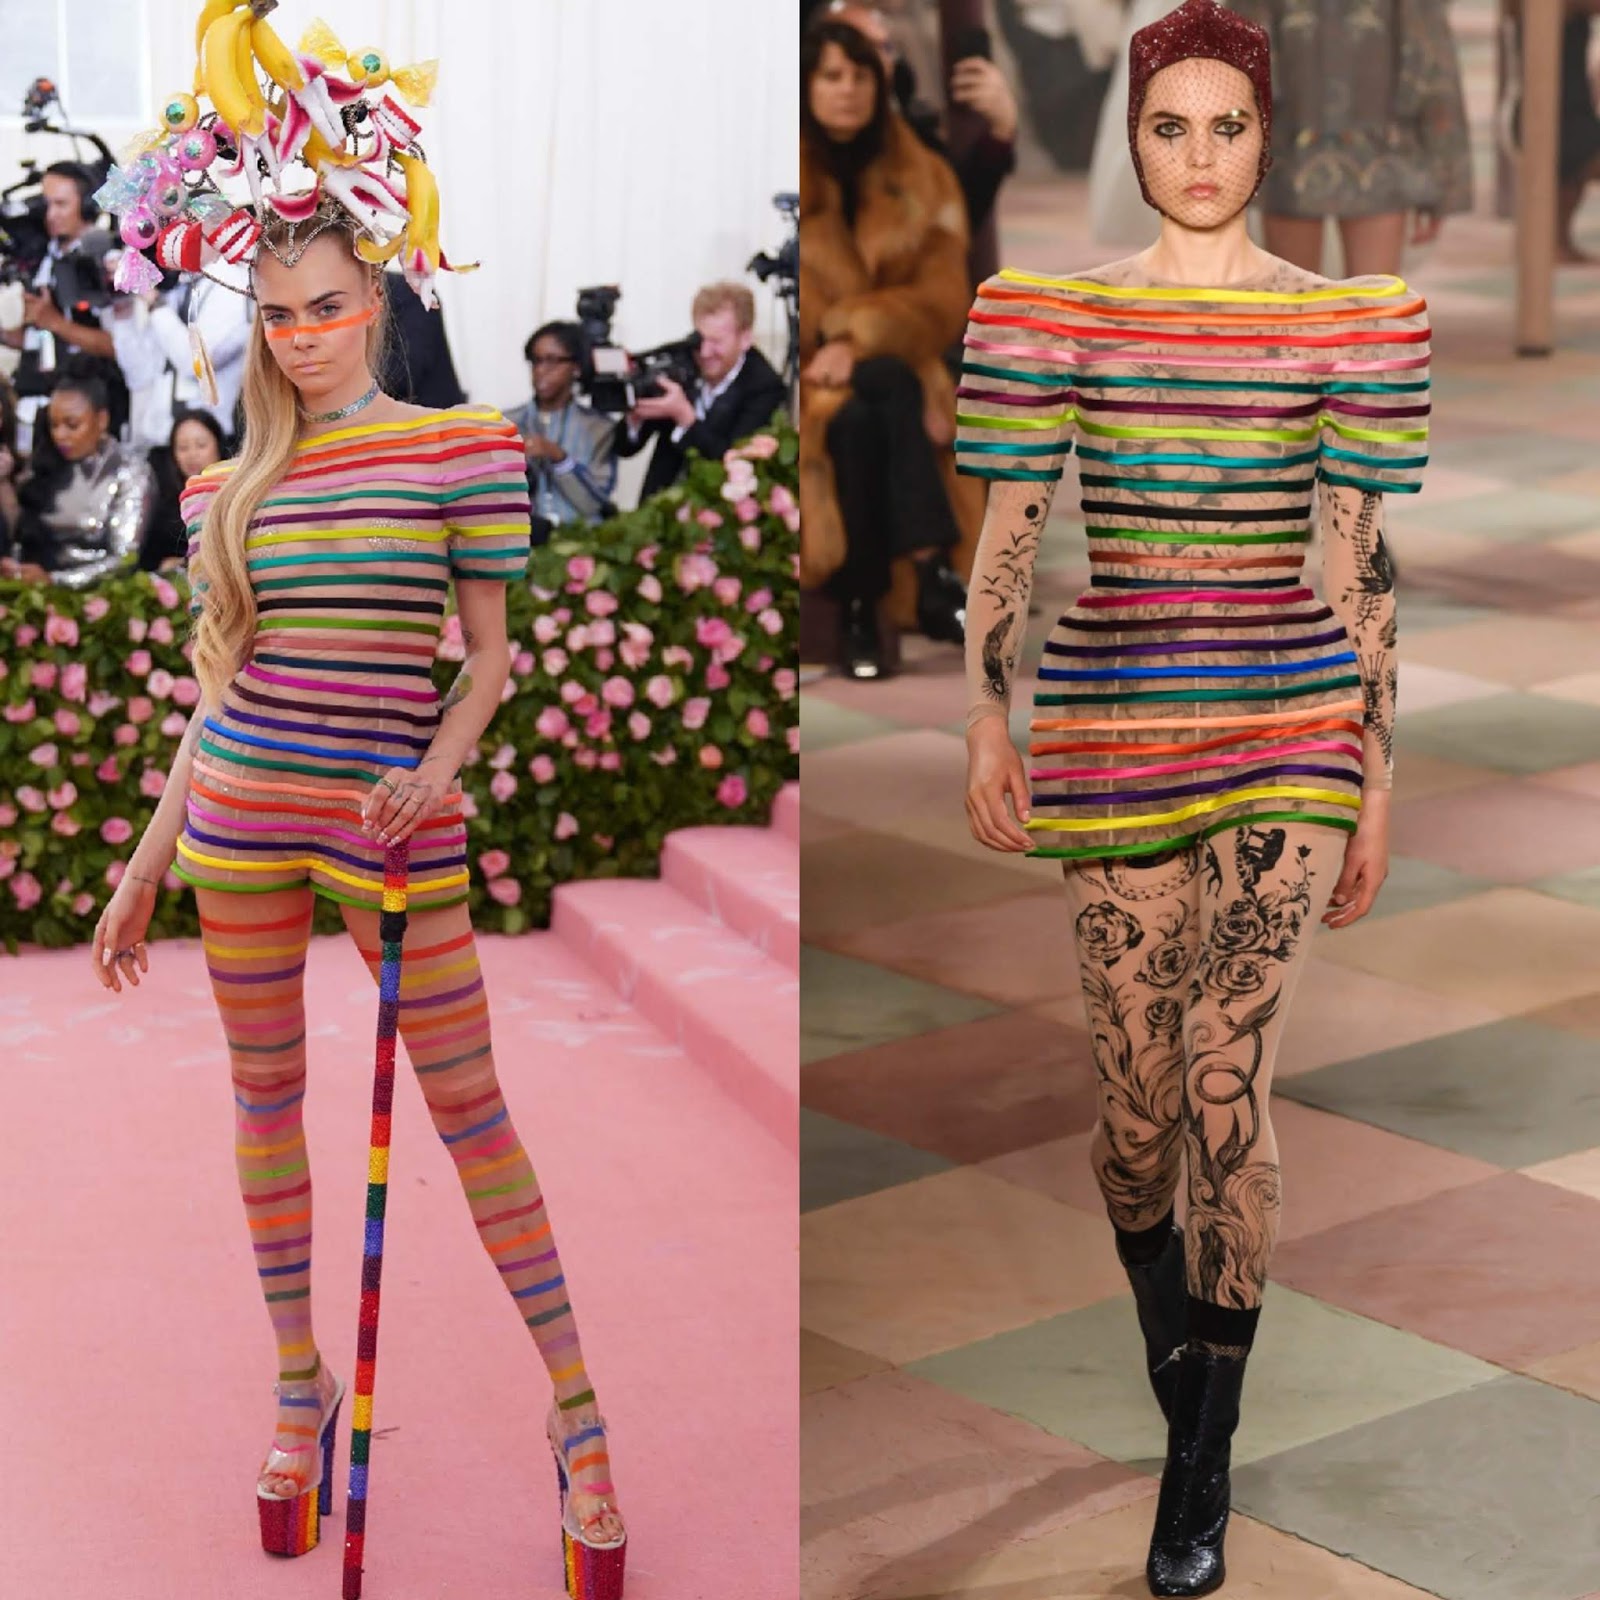 Christian Dior at the 2019 MET Gala Camp: Notes on Fashion